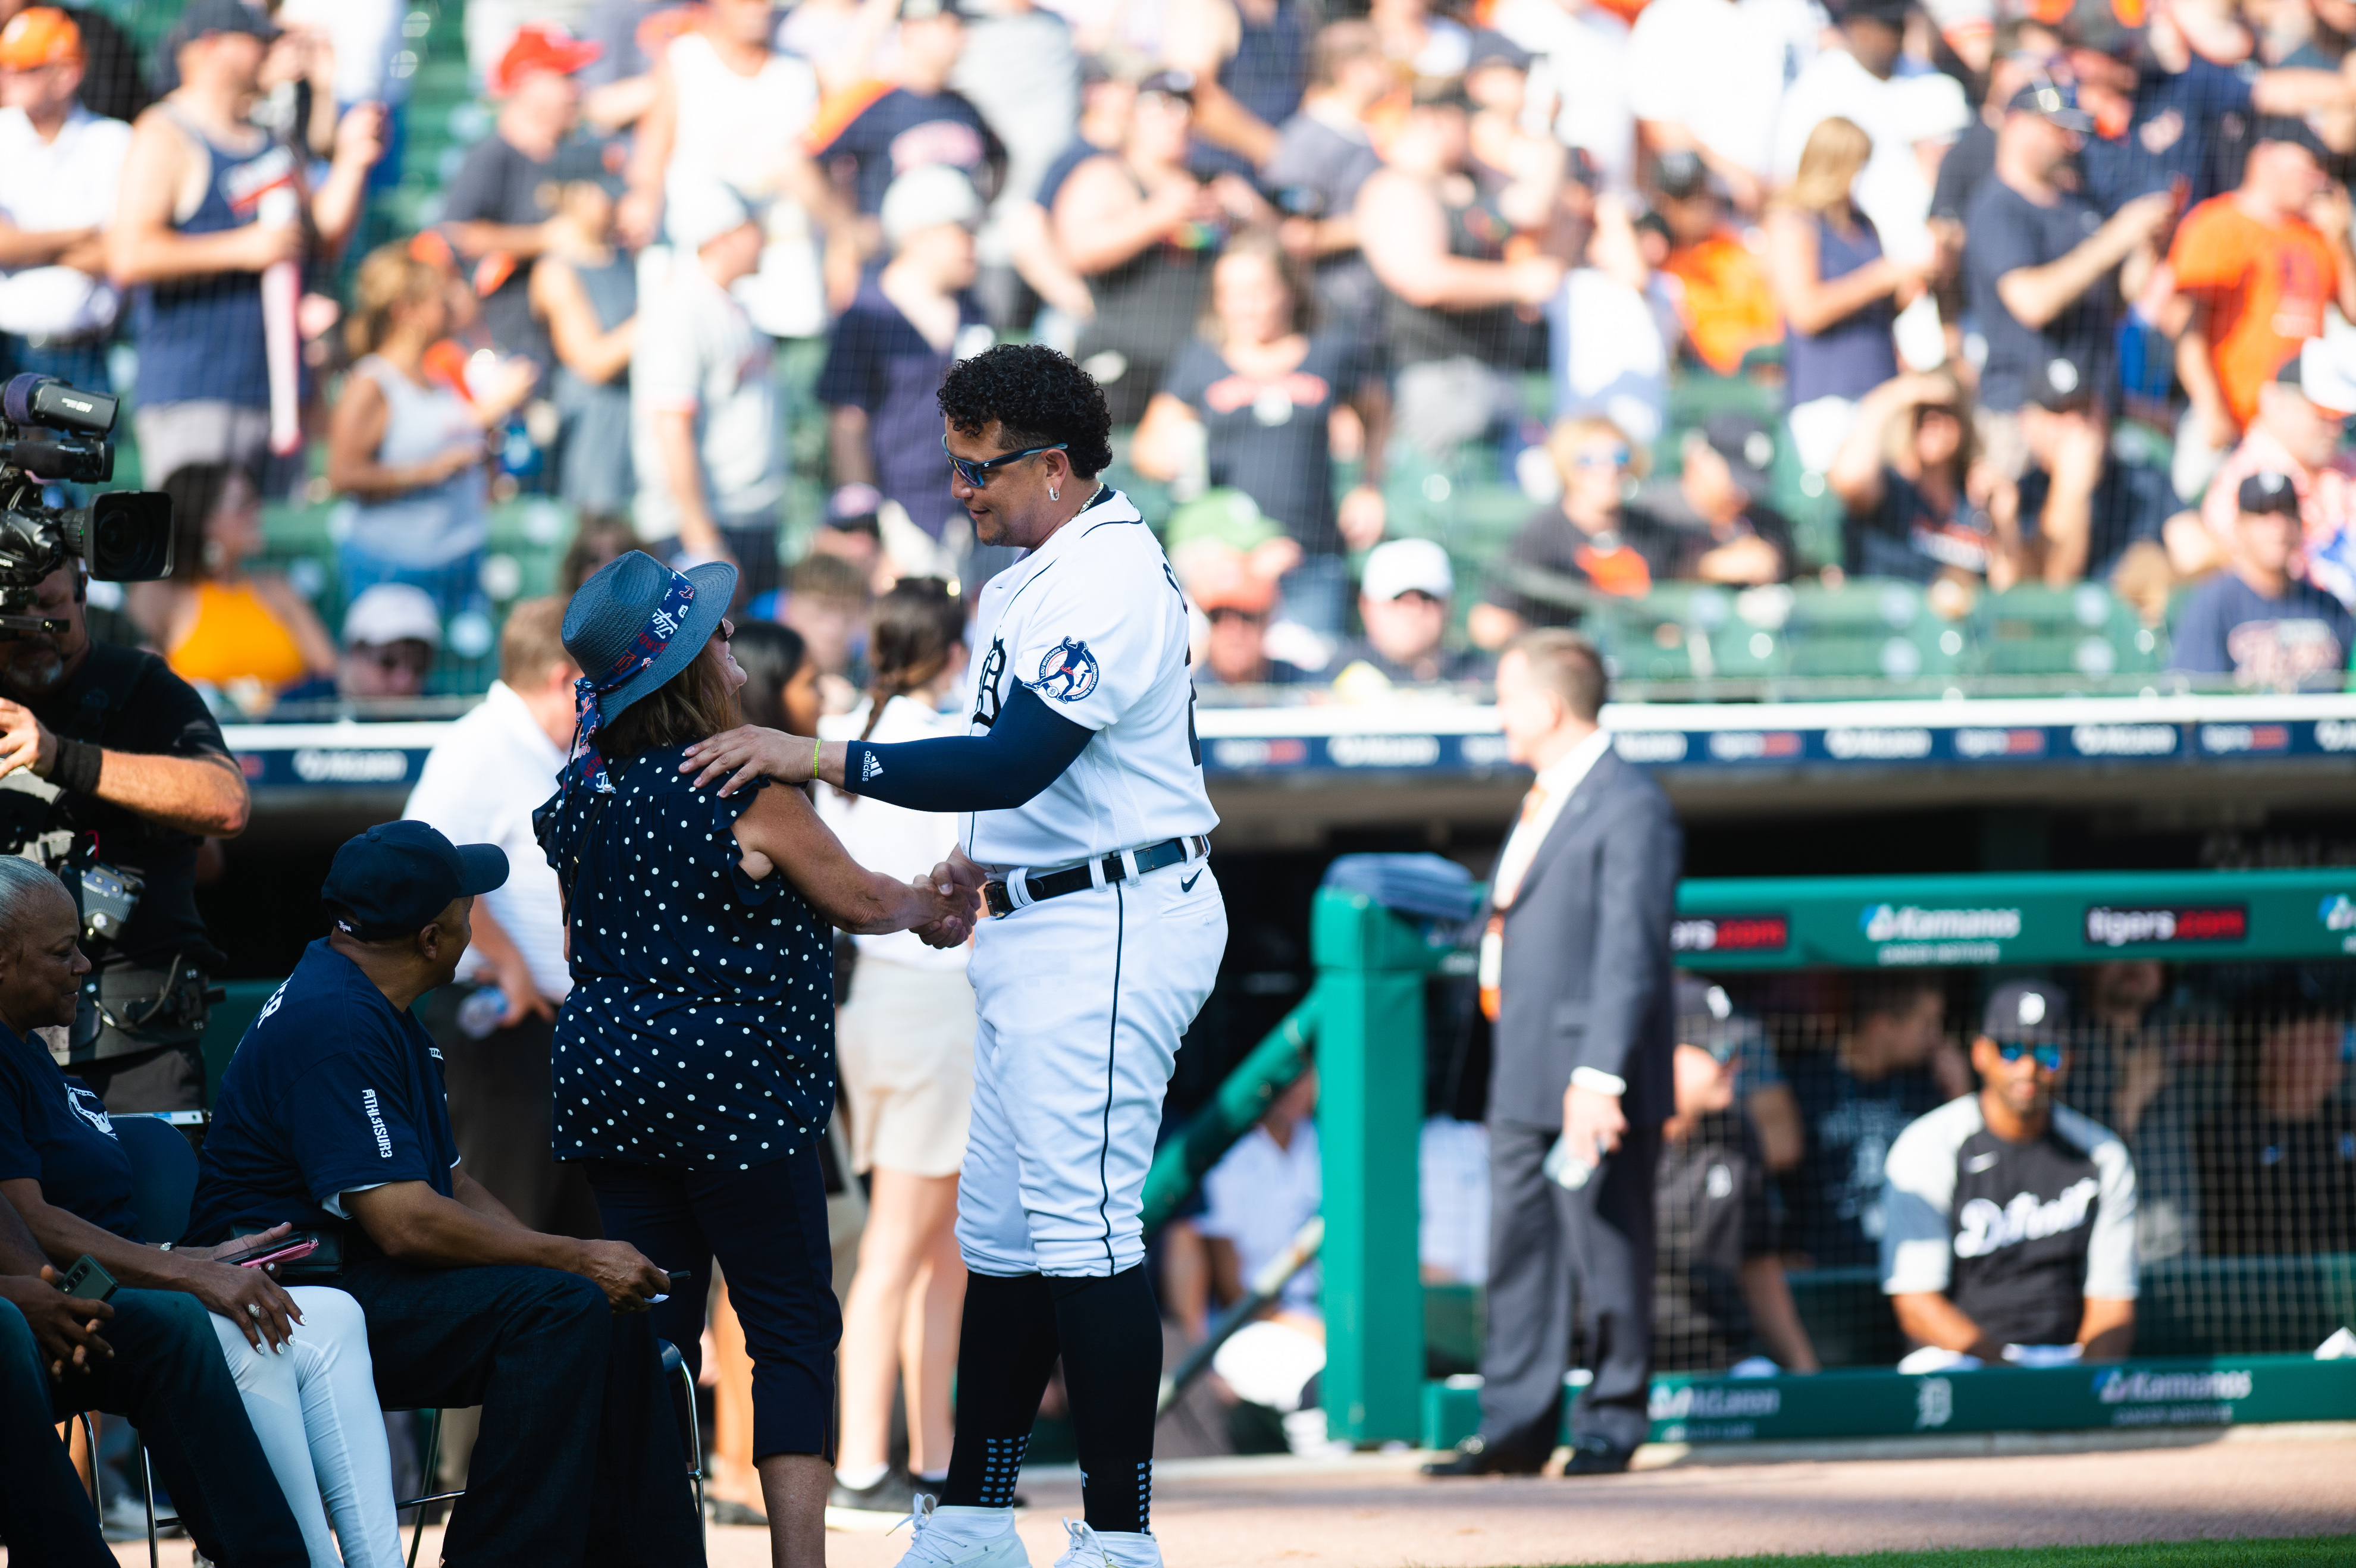 Tigers honor Lou Whitaker: Sights and sounds from Comerica Park 